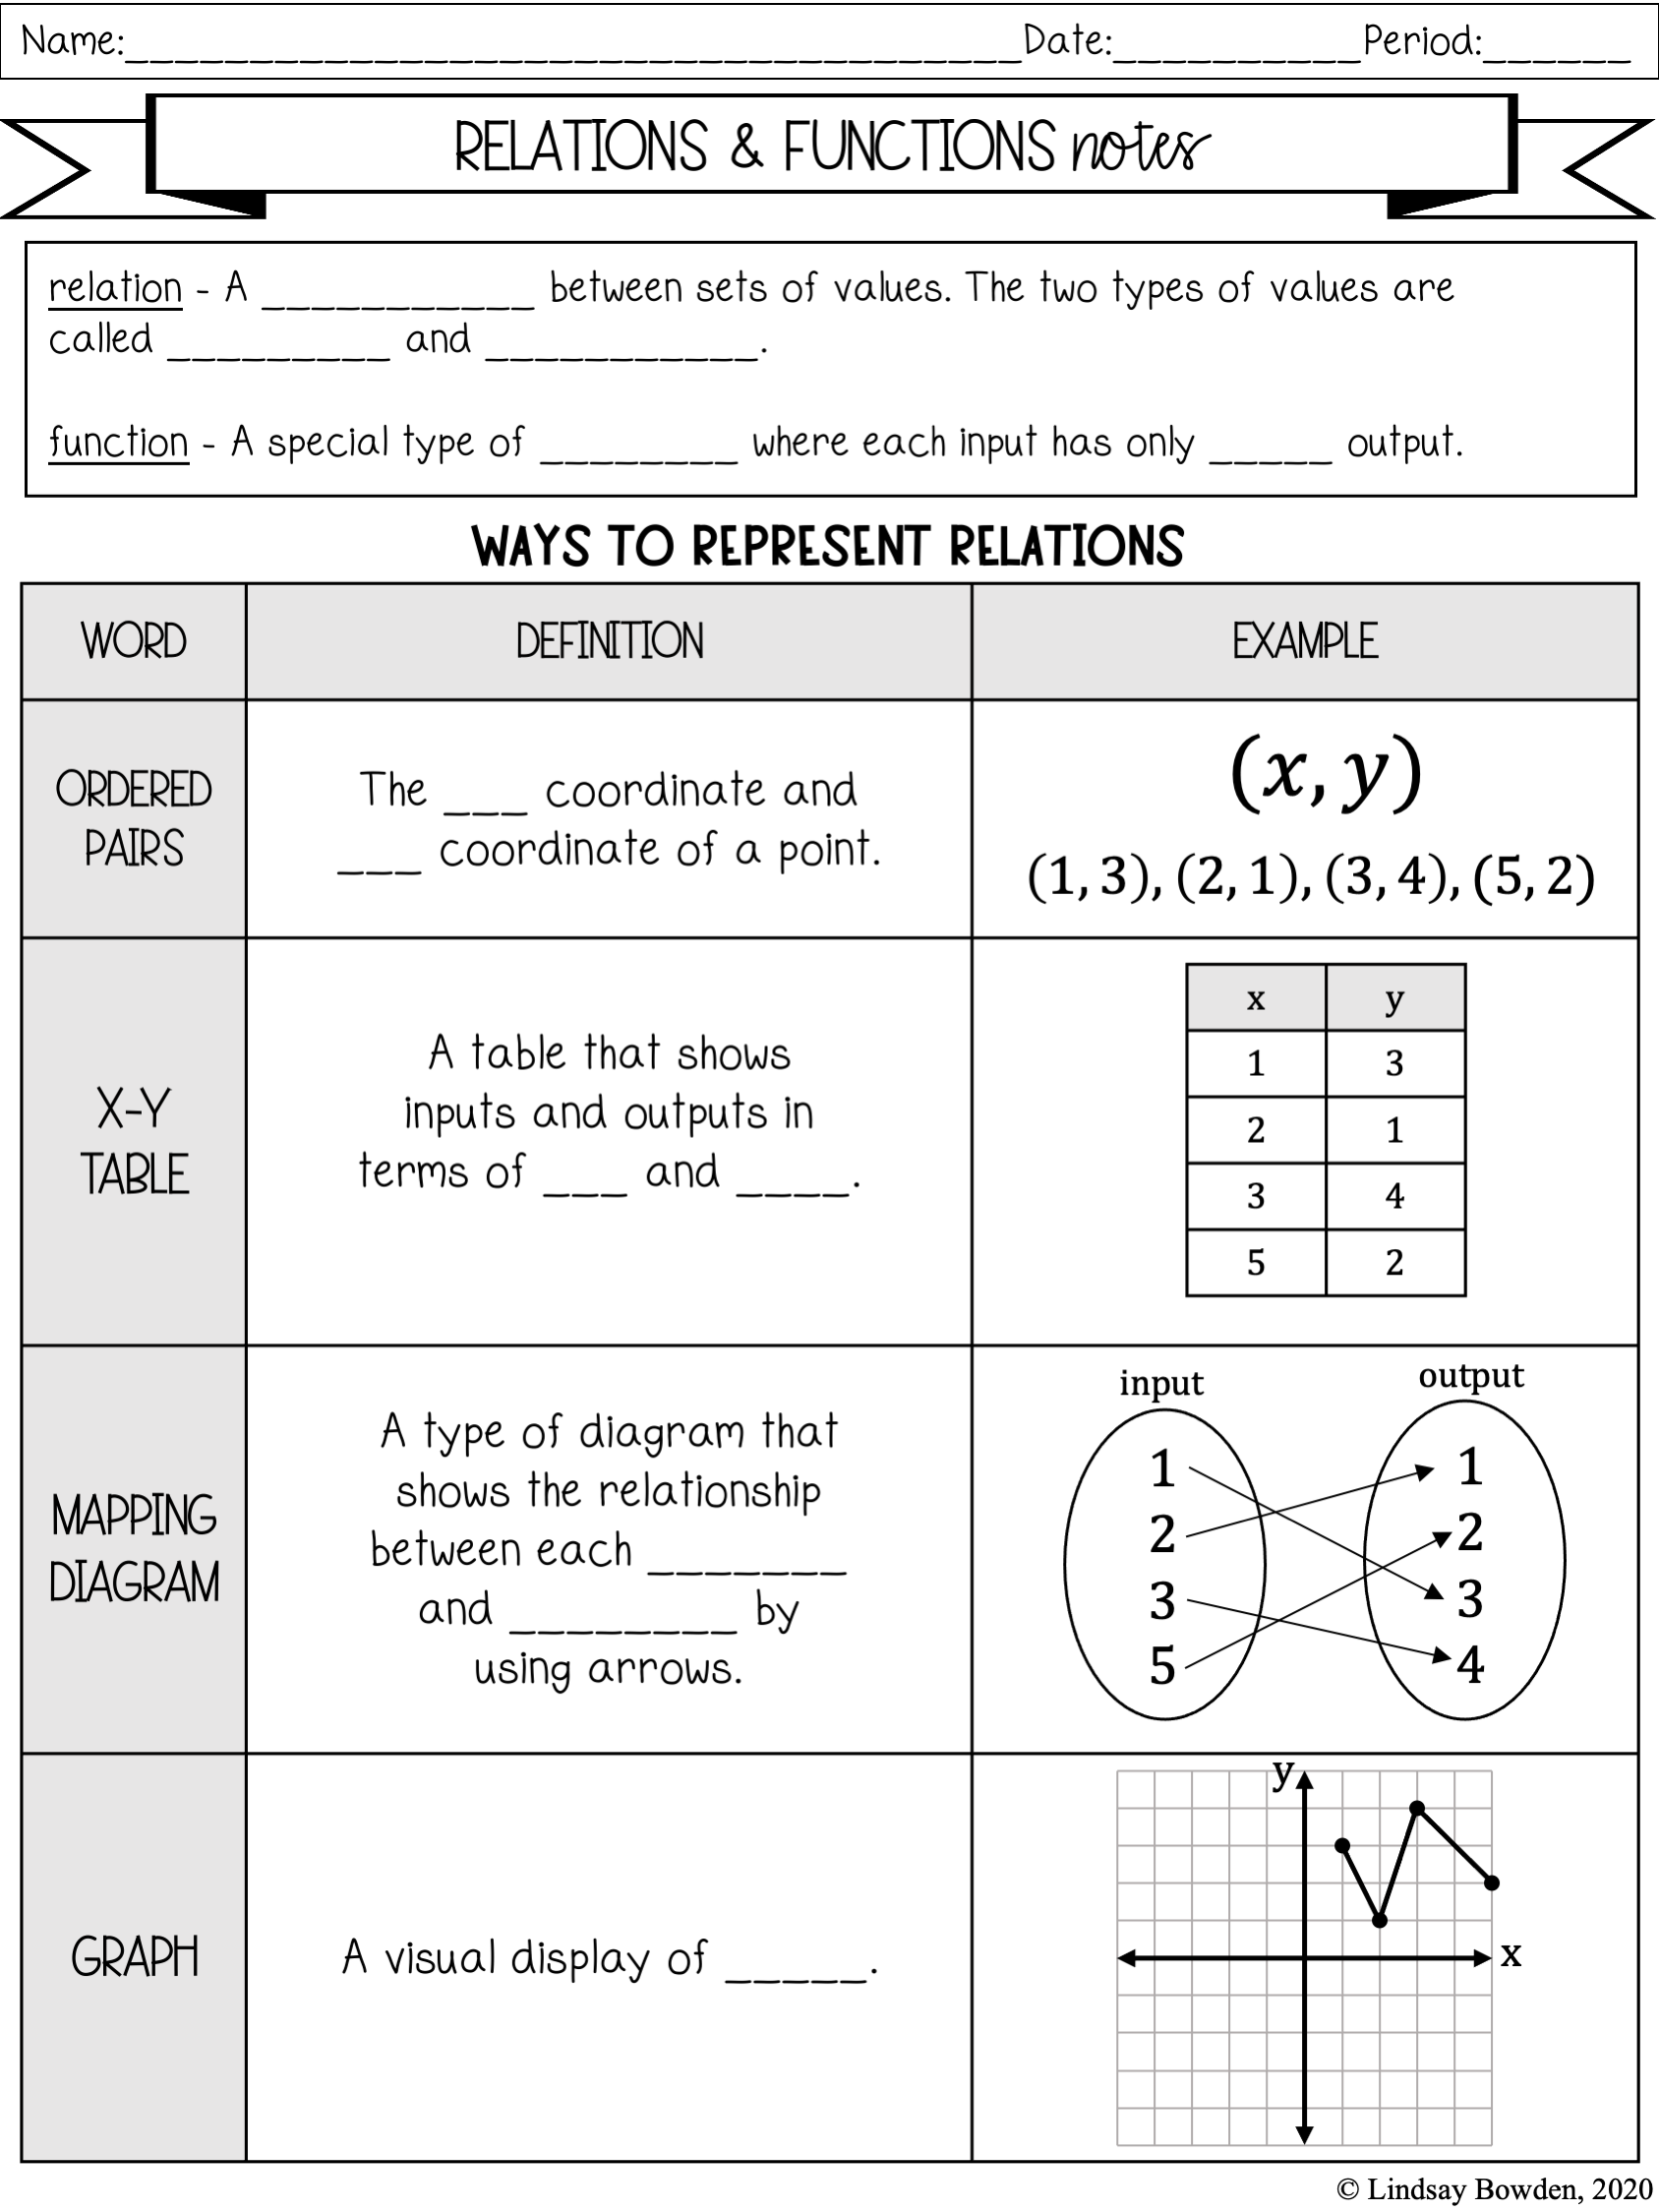 Relations and Functions Notes and Worksheets - Lindsay Bowden For Functions And Relations Worksheet